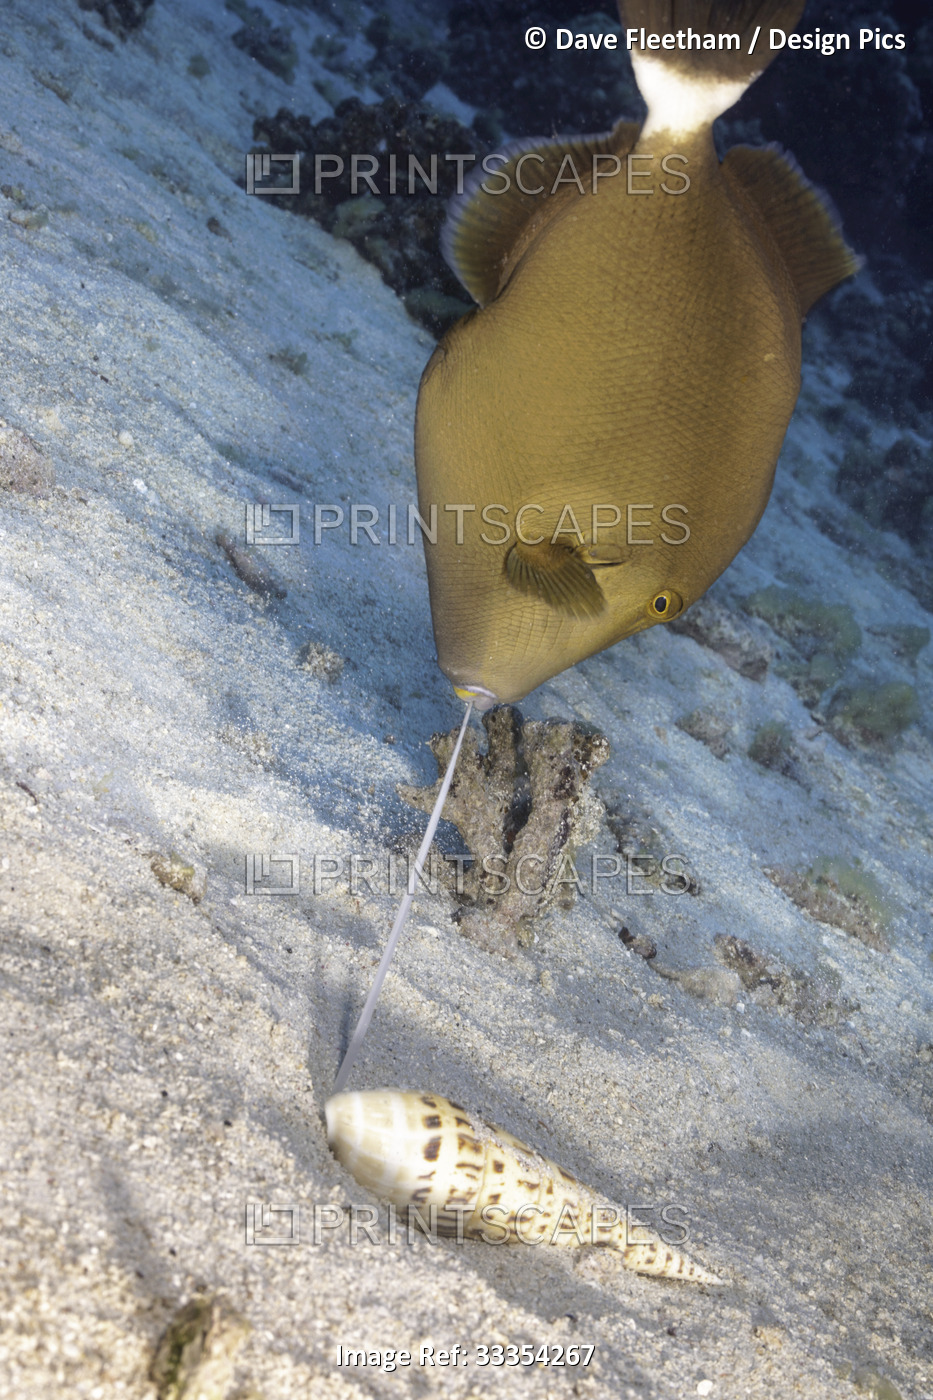 This is one in a series of four images of a bridled or masked triggerfish ...